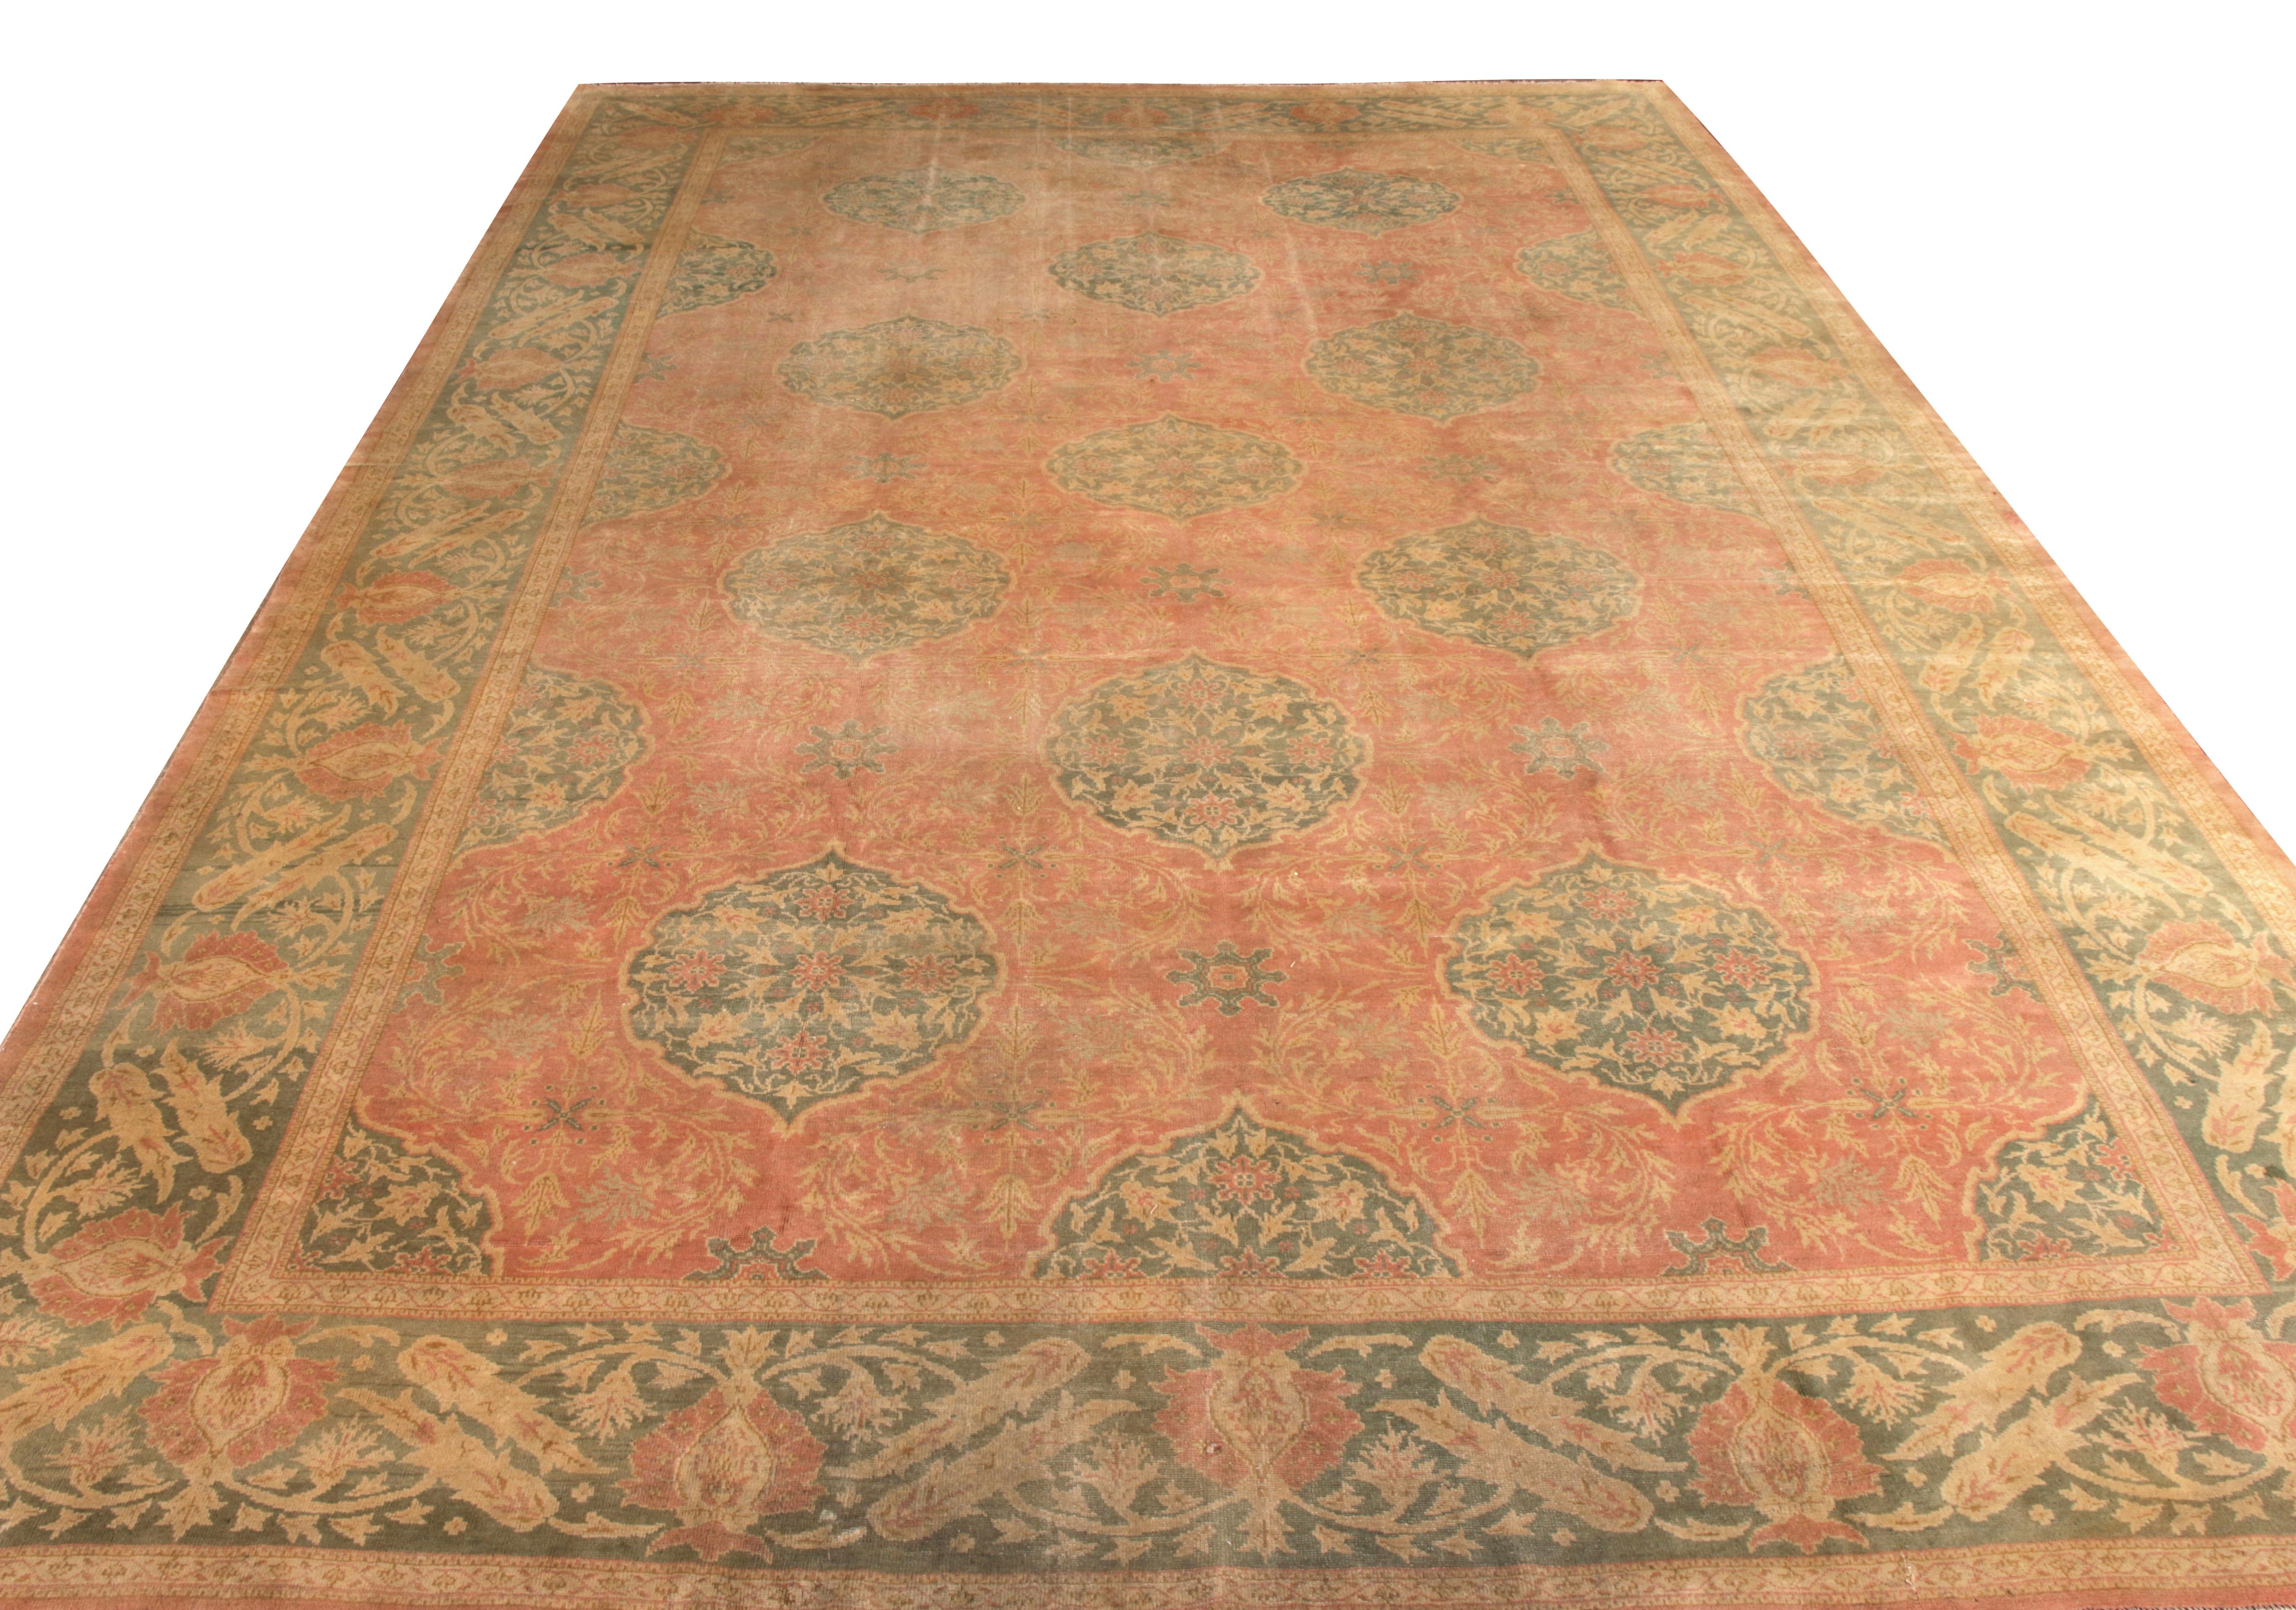 Hand knotted in wool from Turkey circa 1920-1930, an antique 12x17 Oushak rug revelling in classic sensibilities of the era. The collectible marries a delicate floral pattern with luscious red and green colors in an iconic, seldom-seen pattern to